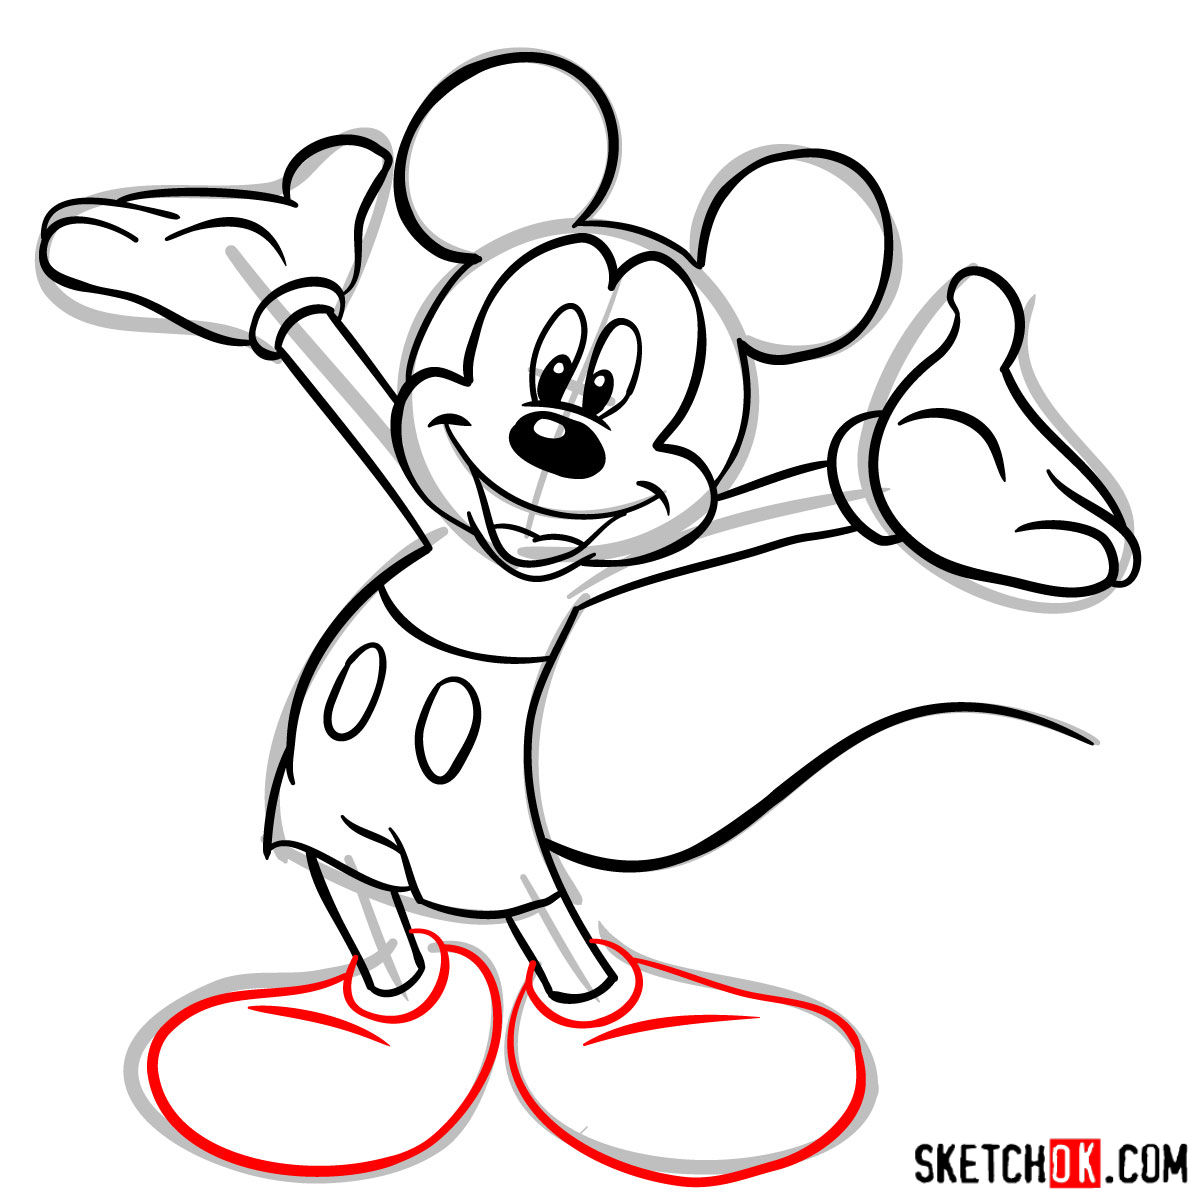 How to draw Mickey Mouse - step 10